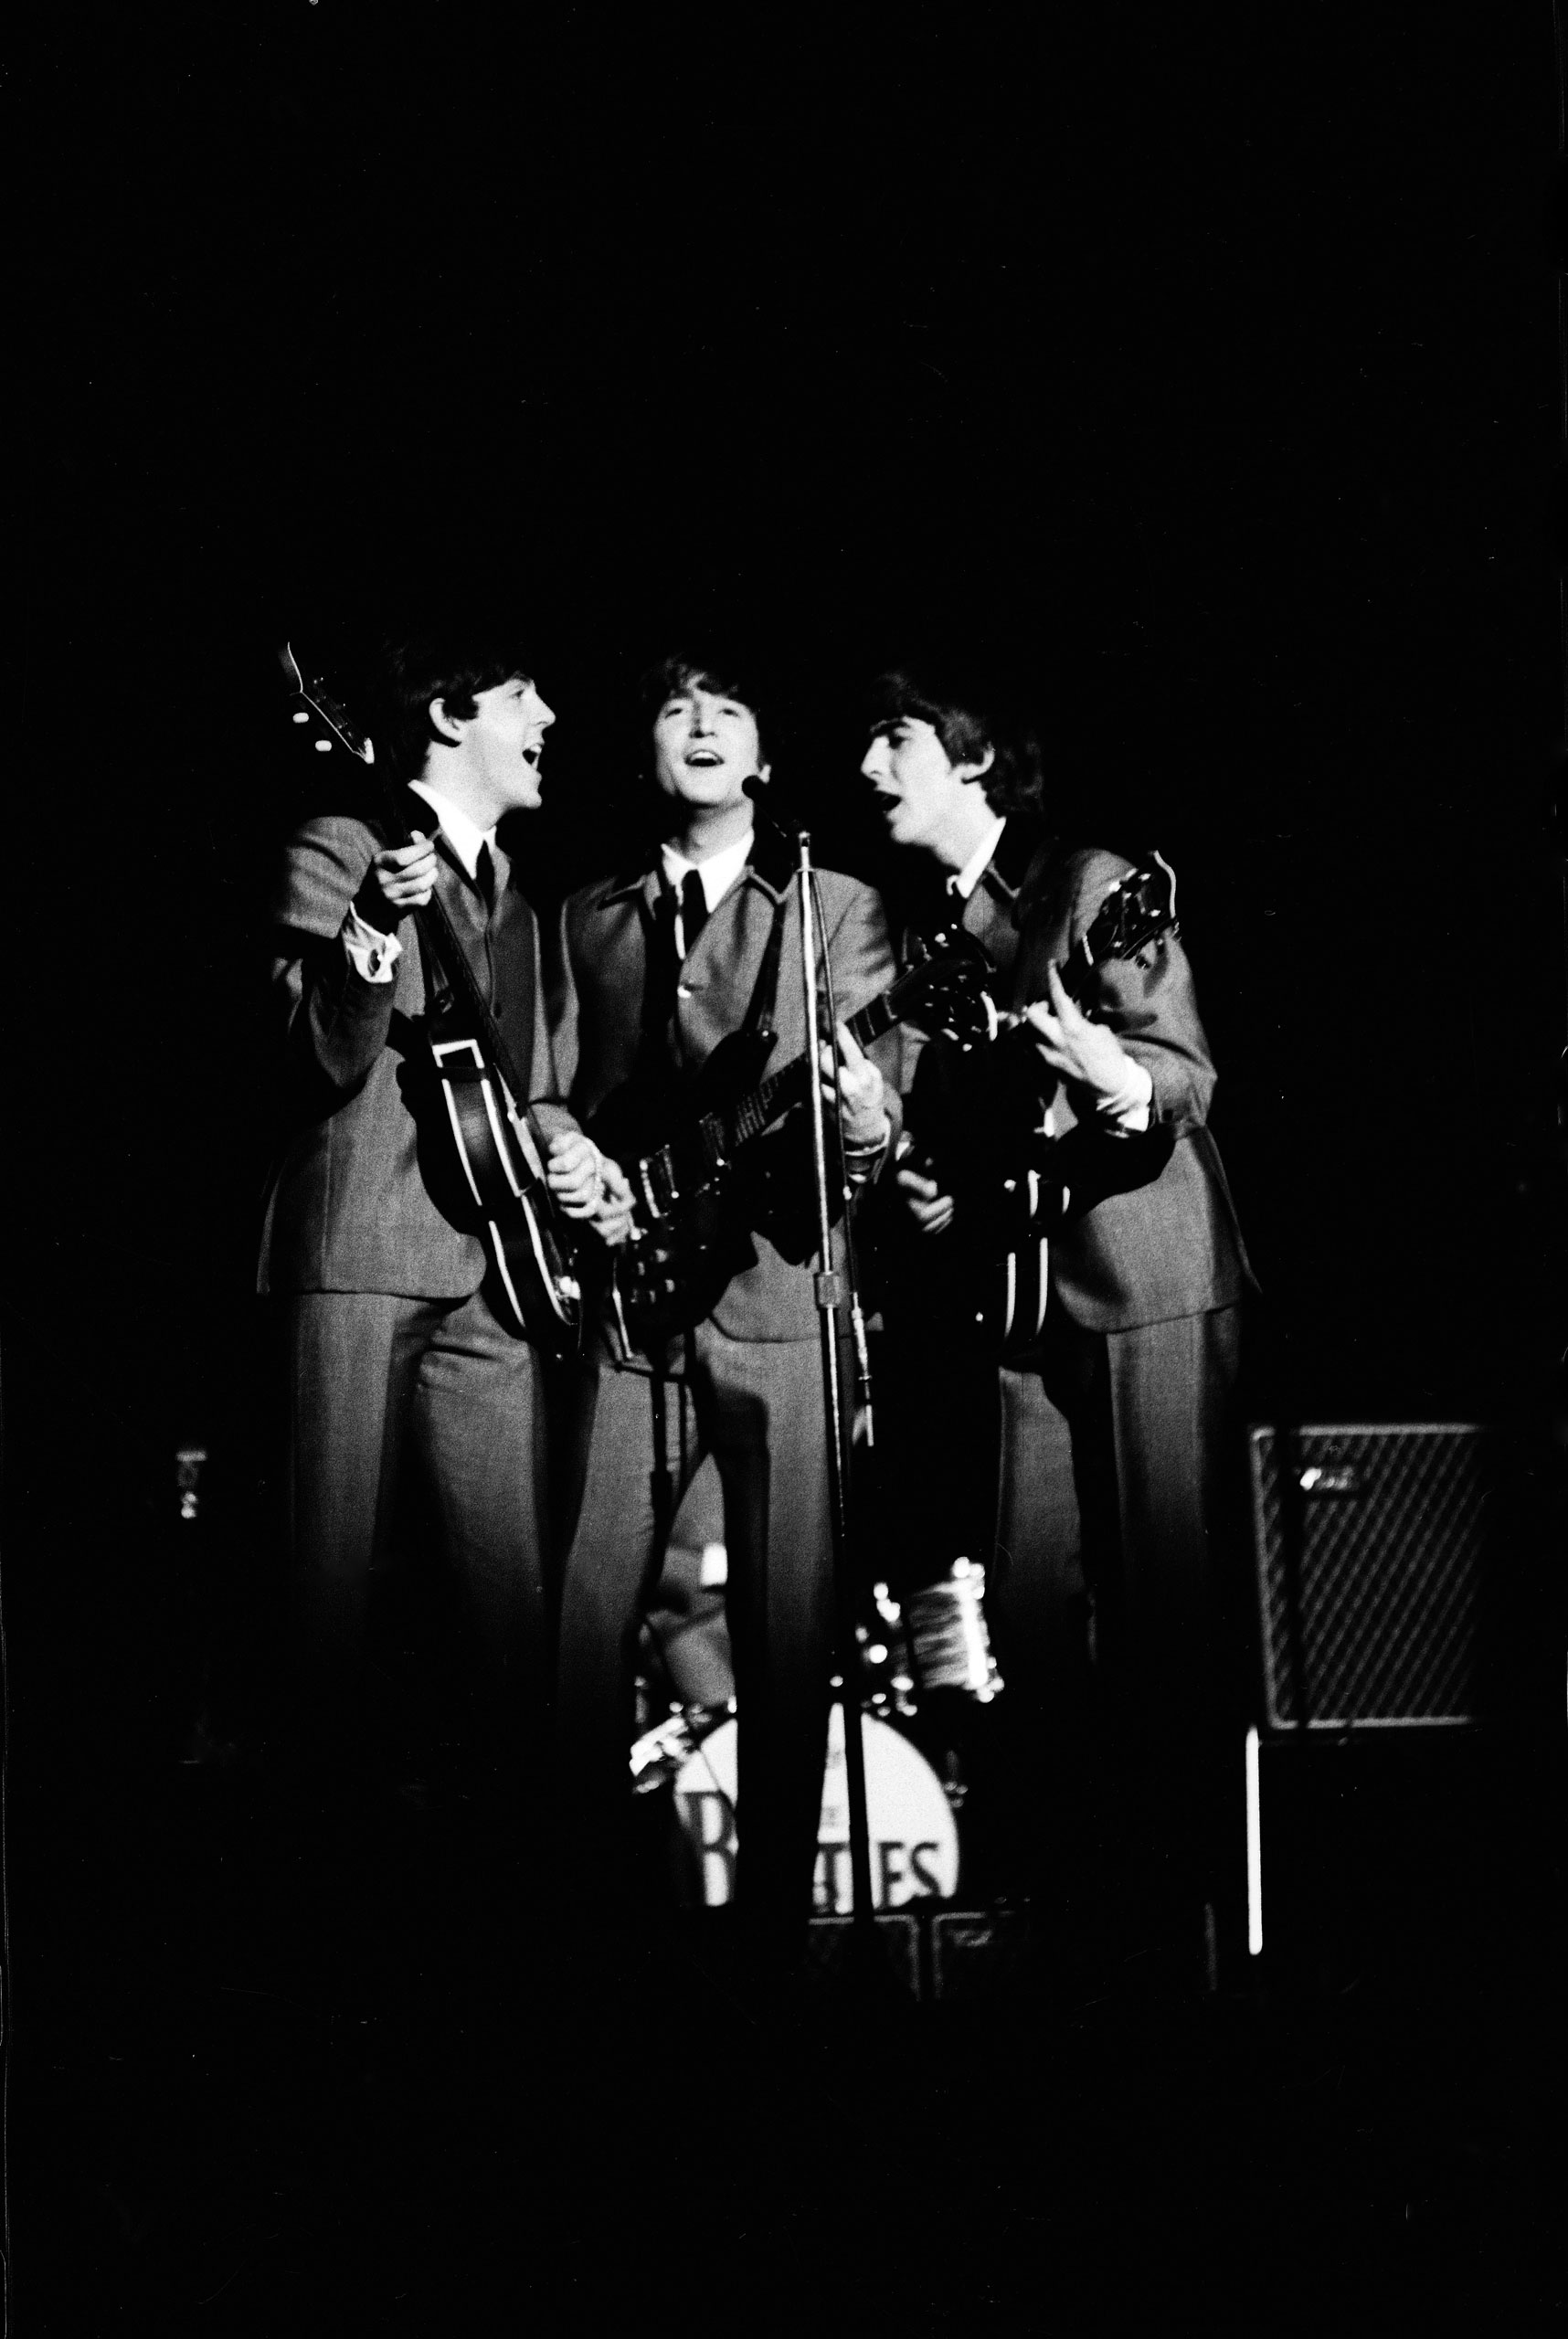 Beatles concerts, like this American show in 1964, are noisy affairs where screaming crowds drown out the band.